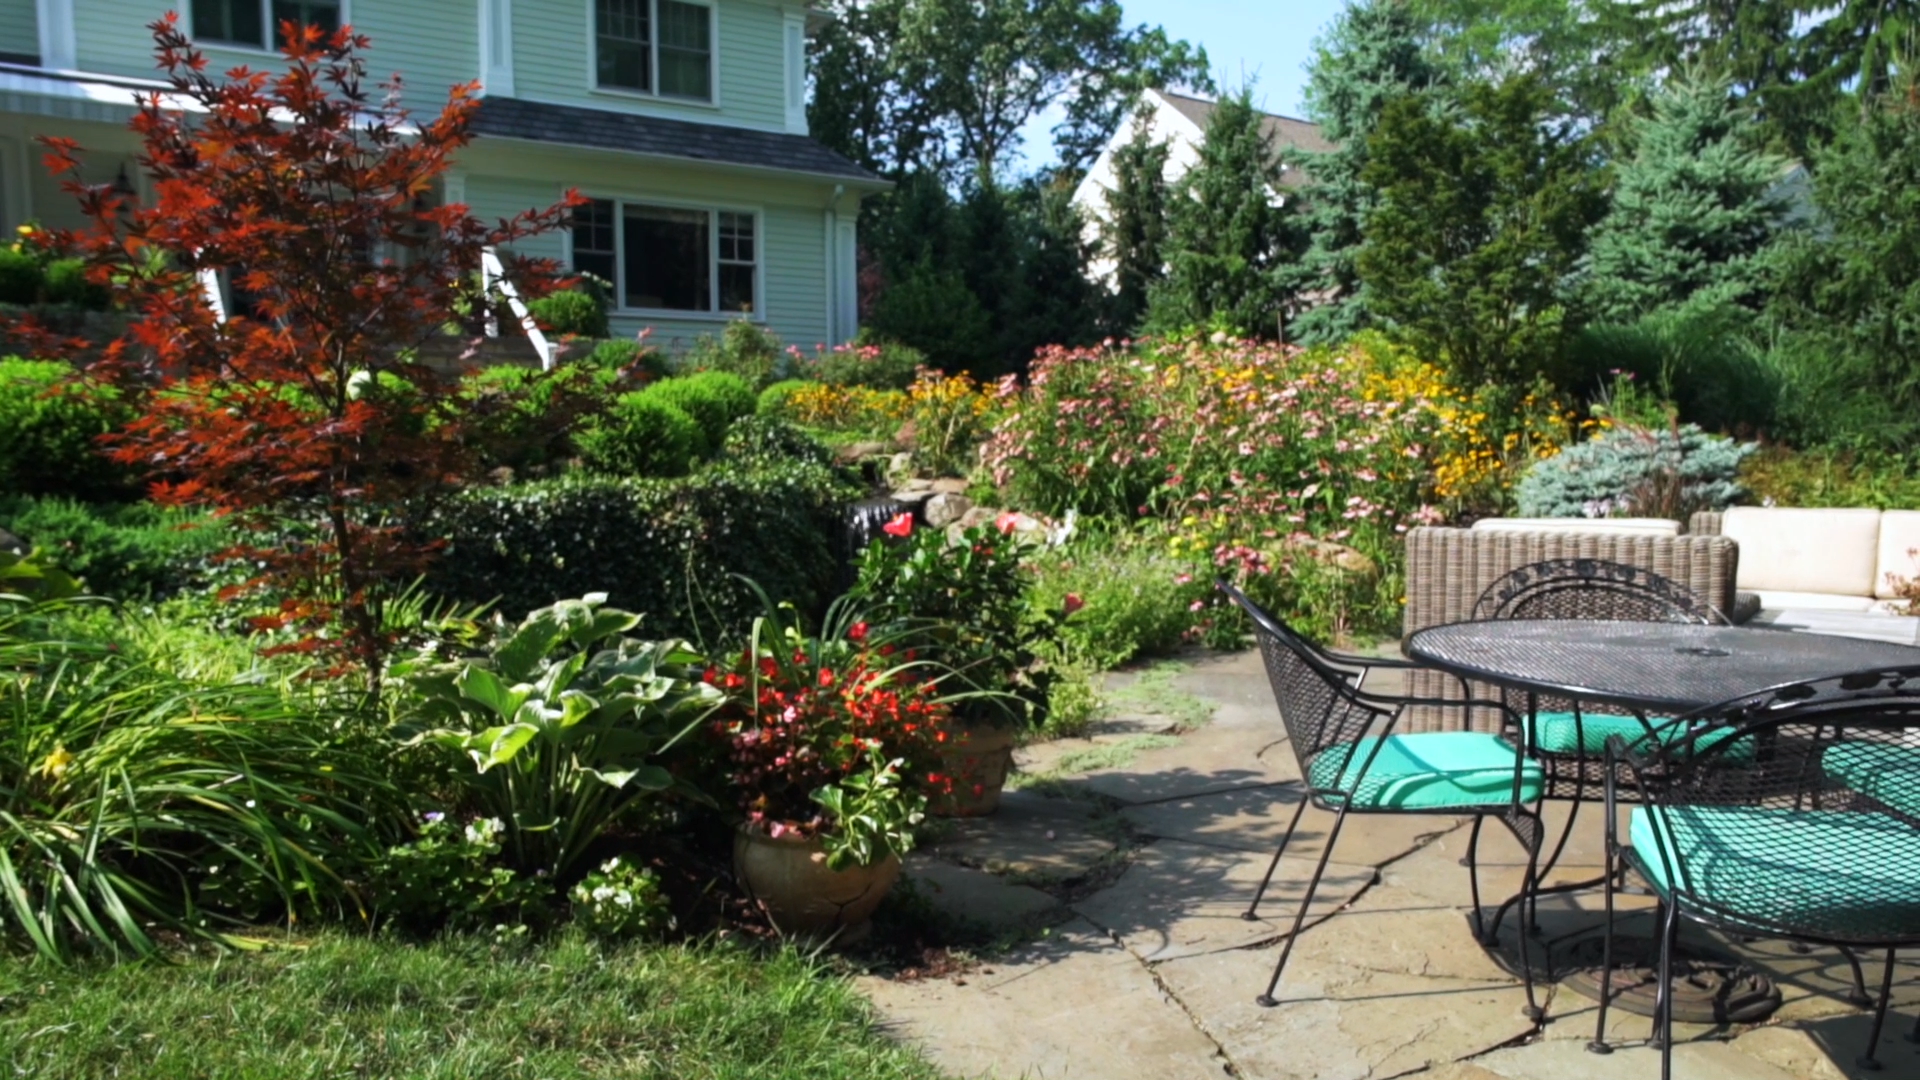 Landscape design in Wyckoff, NJ with plantings